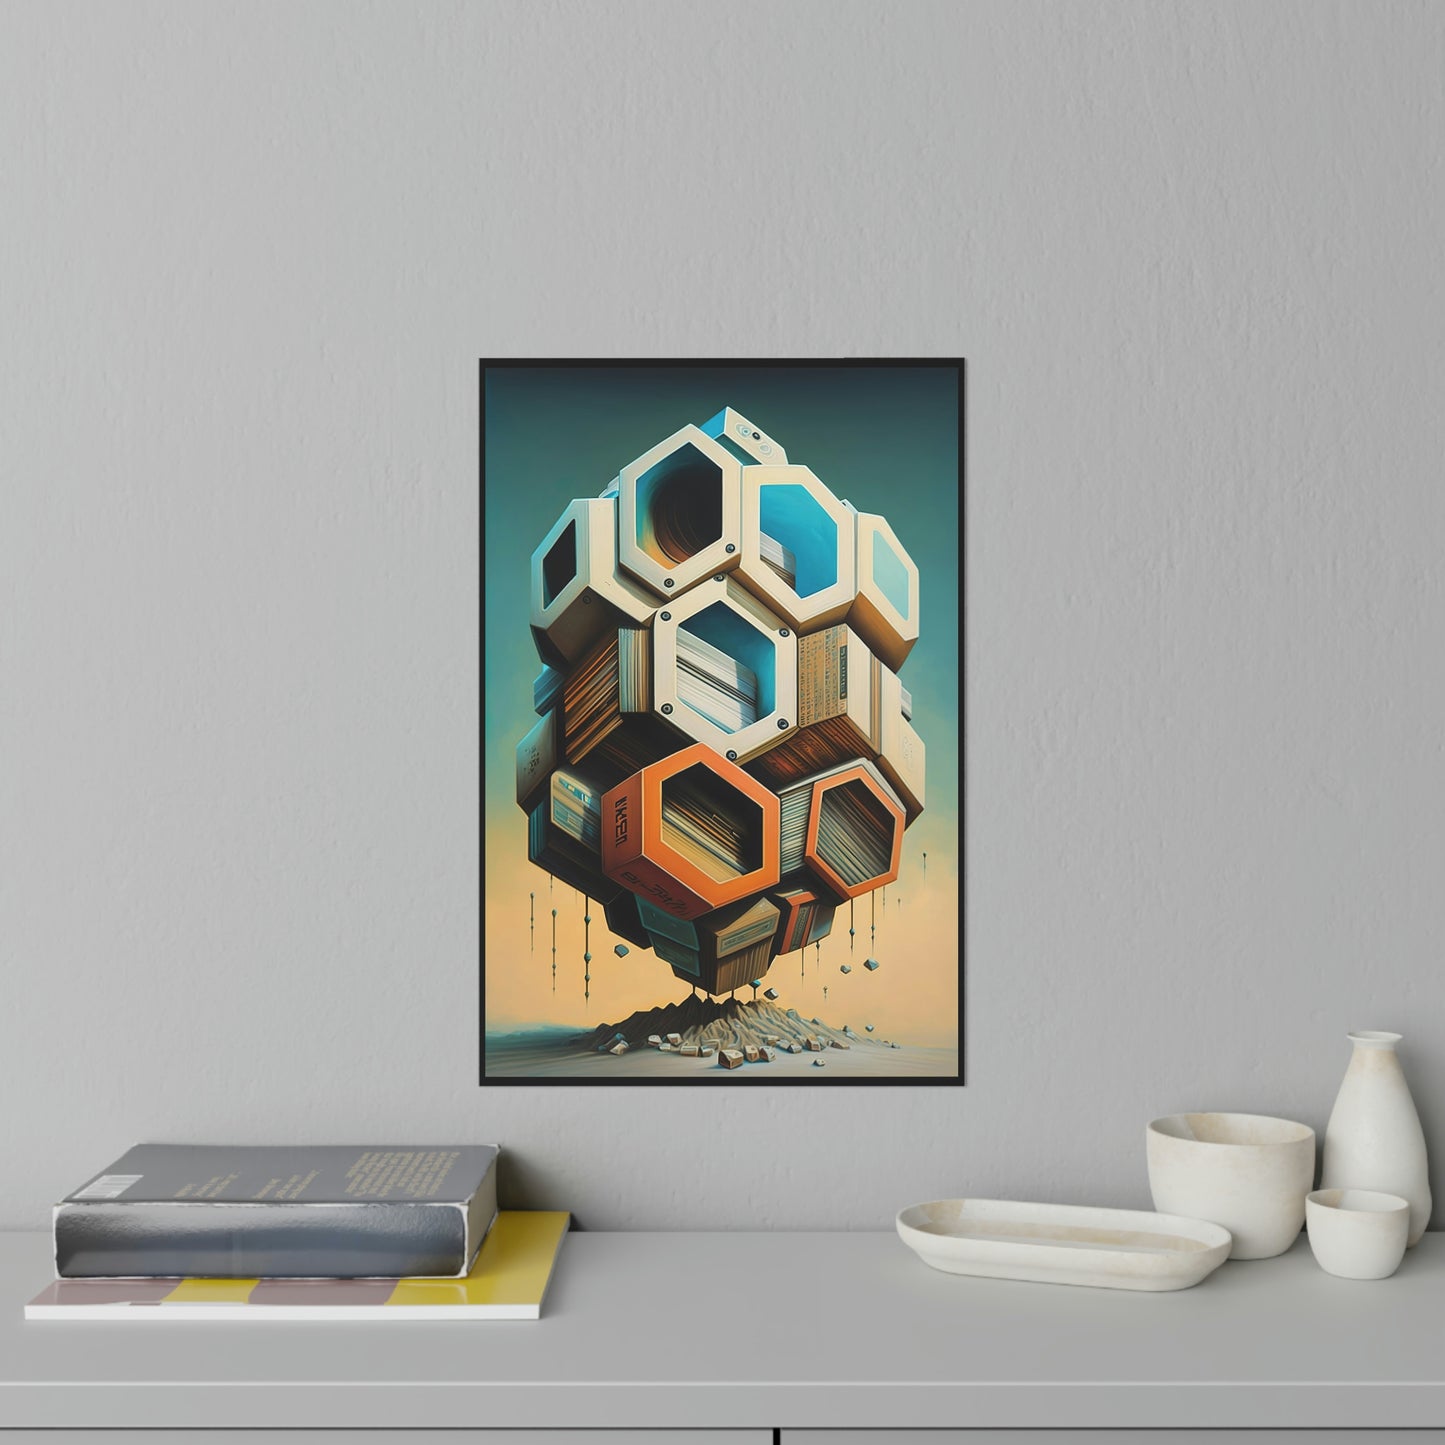 Hive Mind Wall Decal